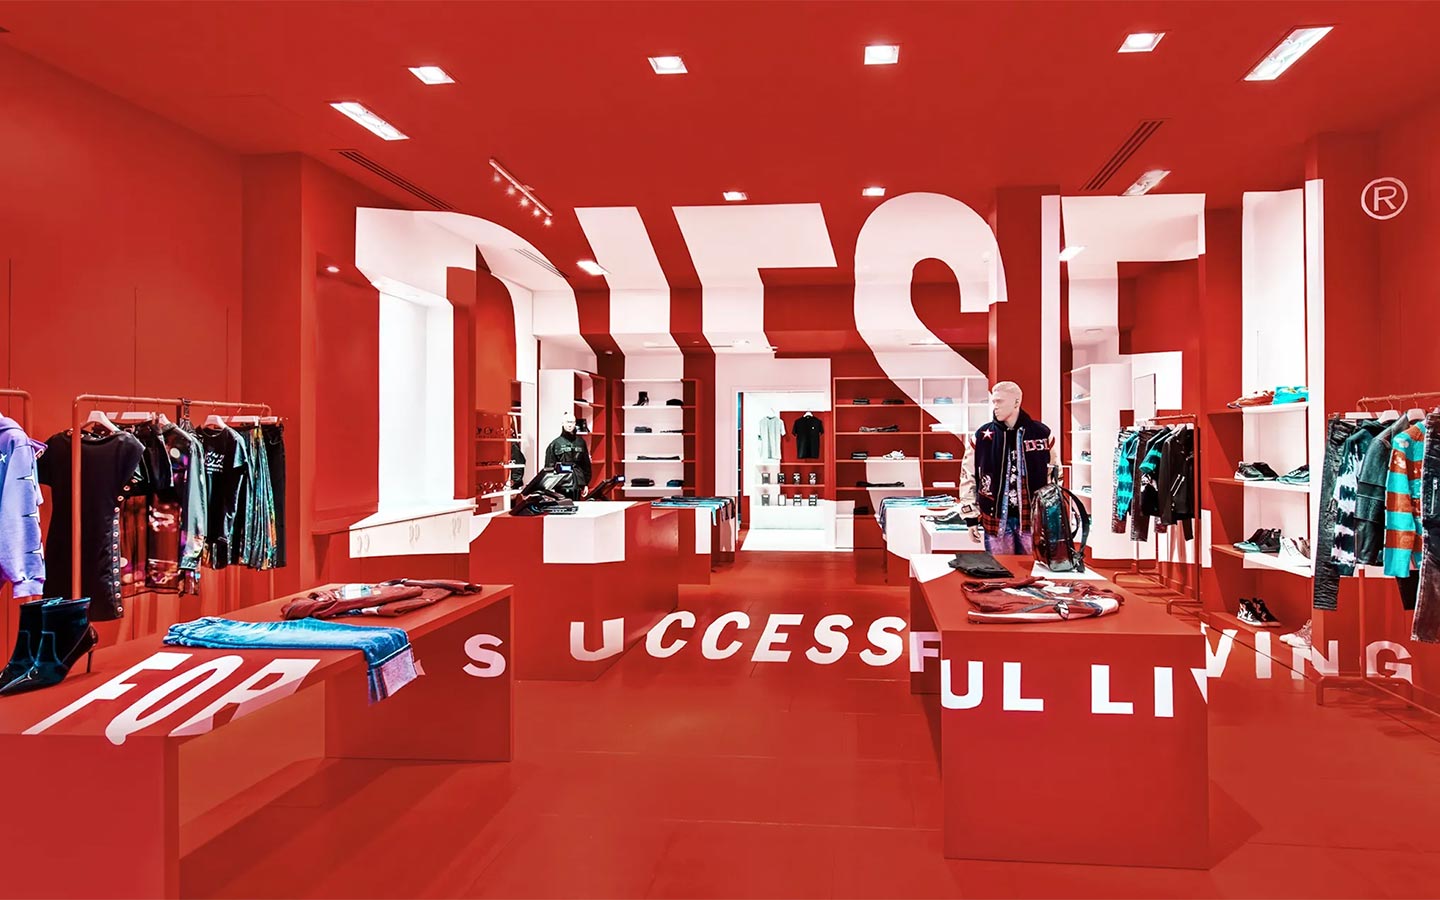 The new Diesel logo inspired the label's new pop-up store concept launched in February 2021 – it was envisioned by creative director Glenn Martens  